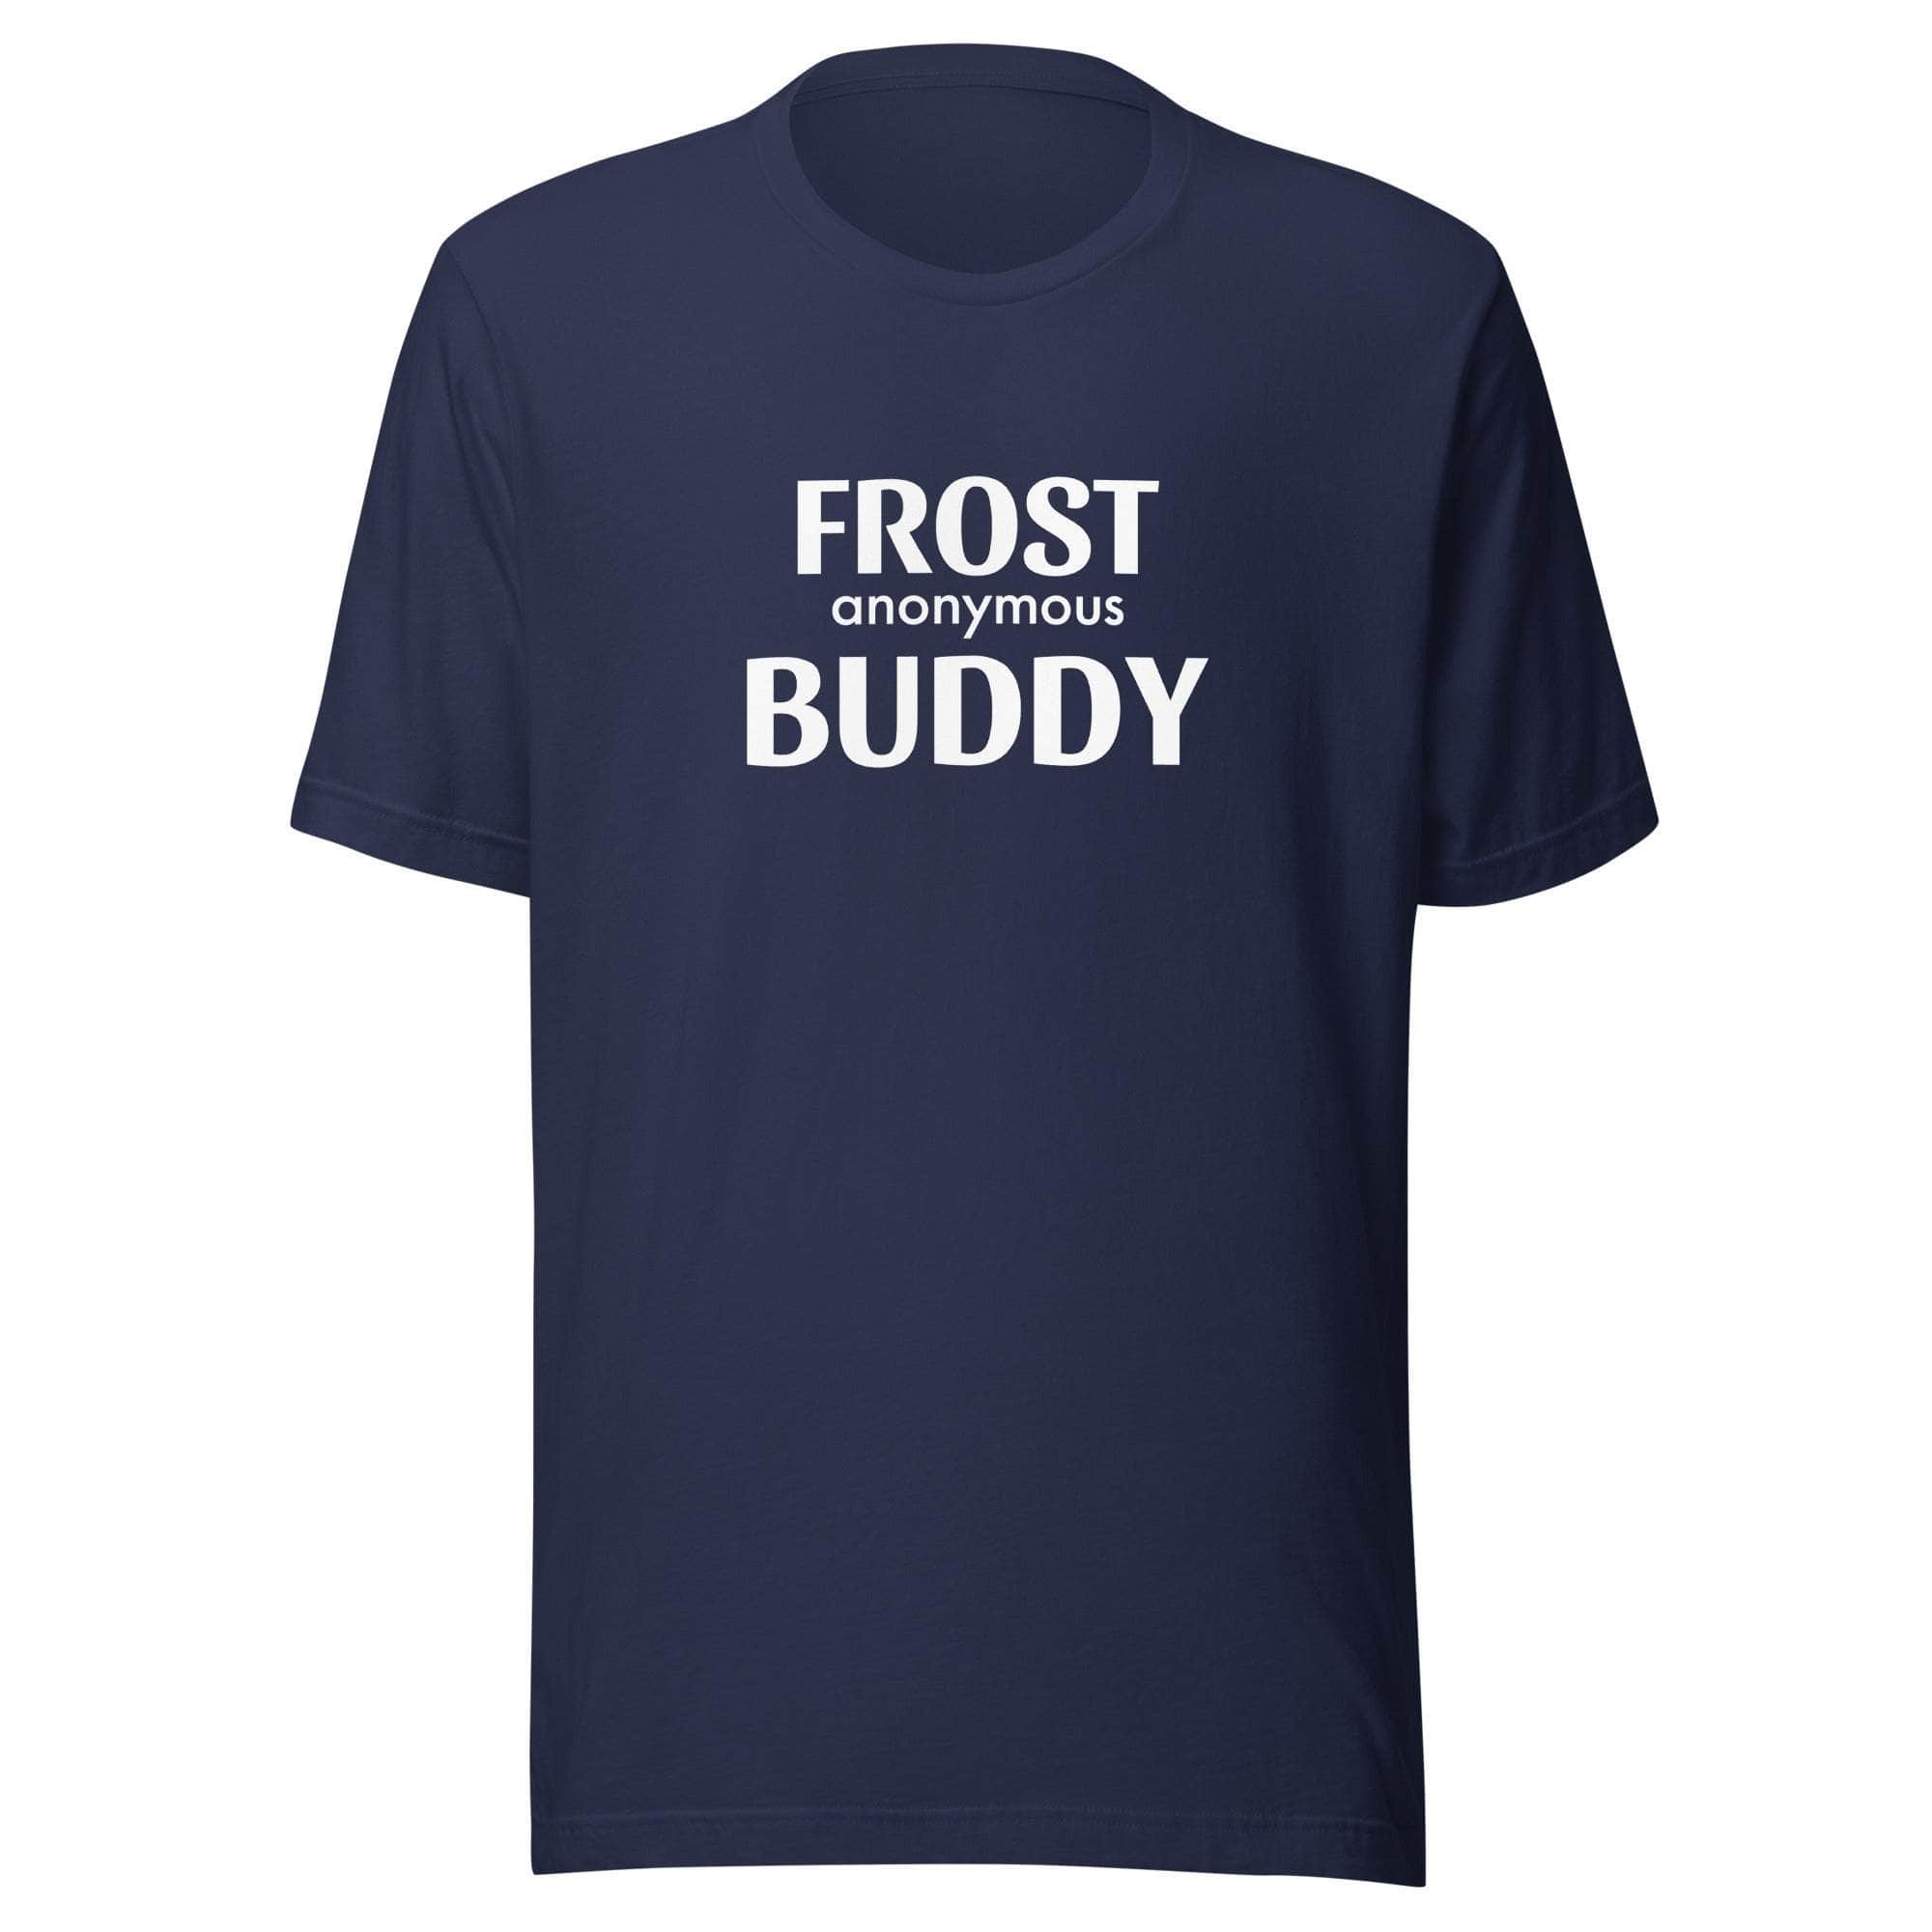 Frost Buddy  Navy / XS Frost Buddy Anonymous Unisex T-shirt